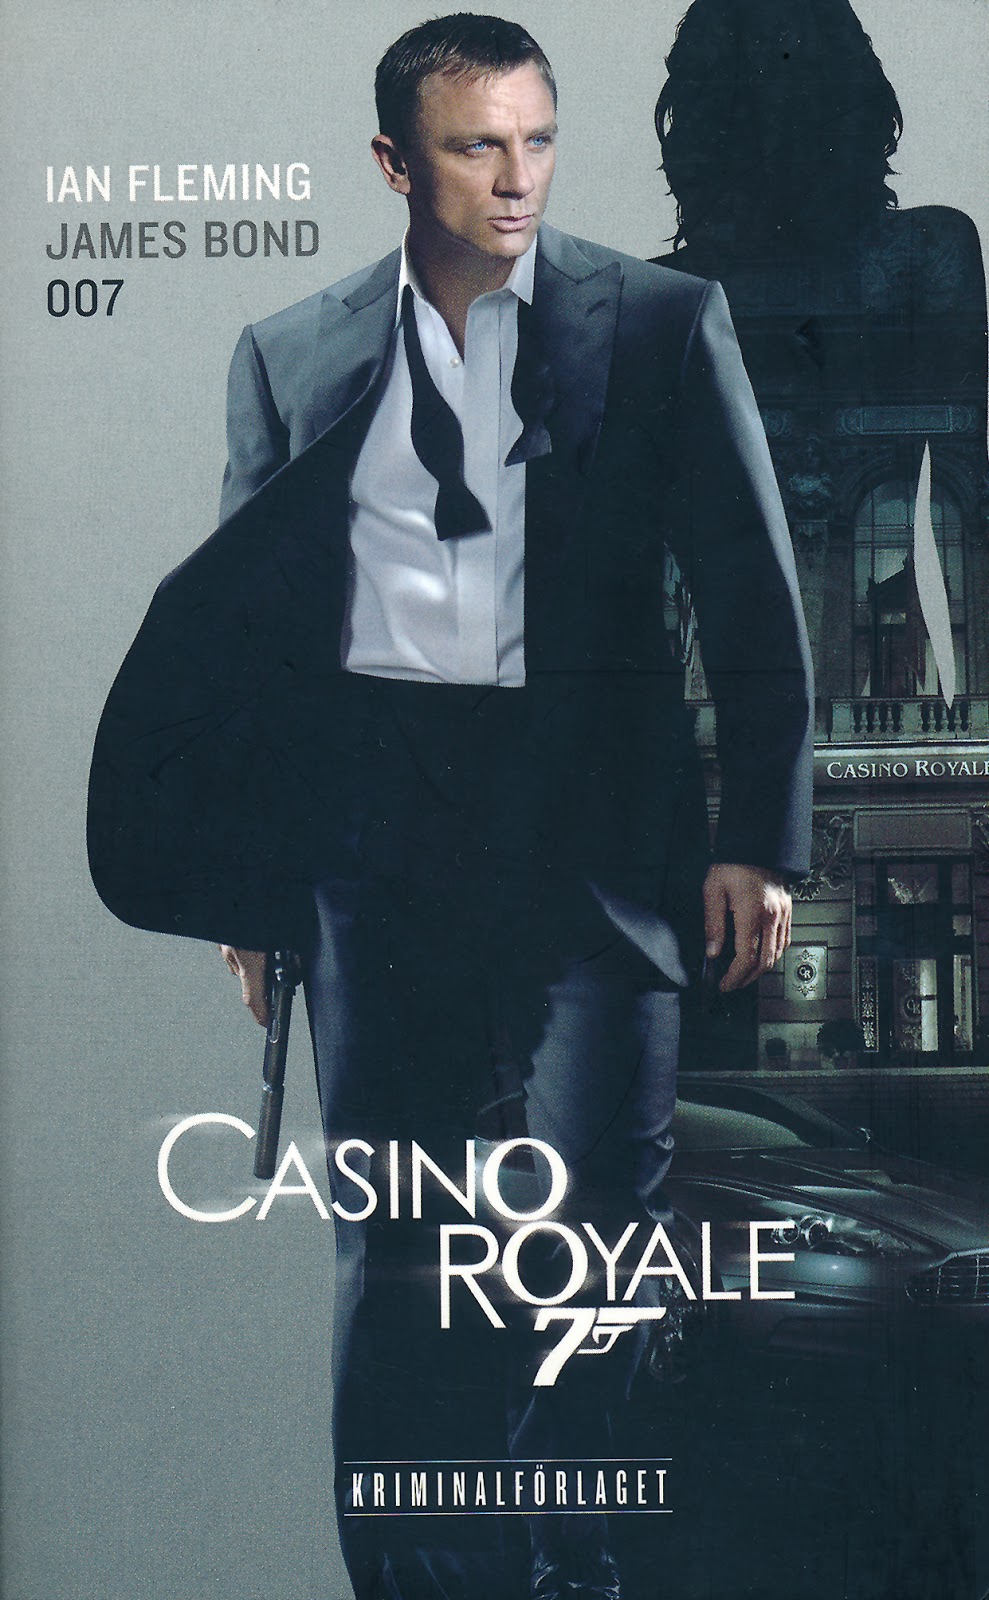 James Bond - The Secret Agent: My 30 different editions of CASINO ROYALE